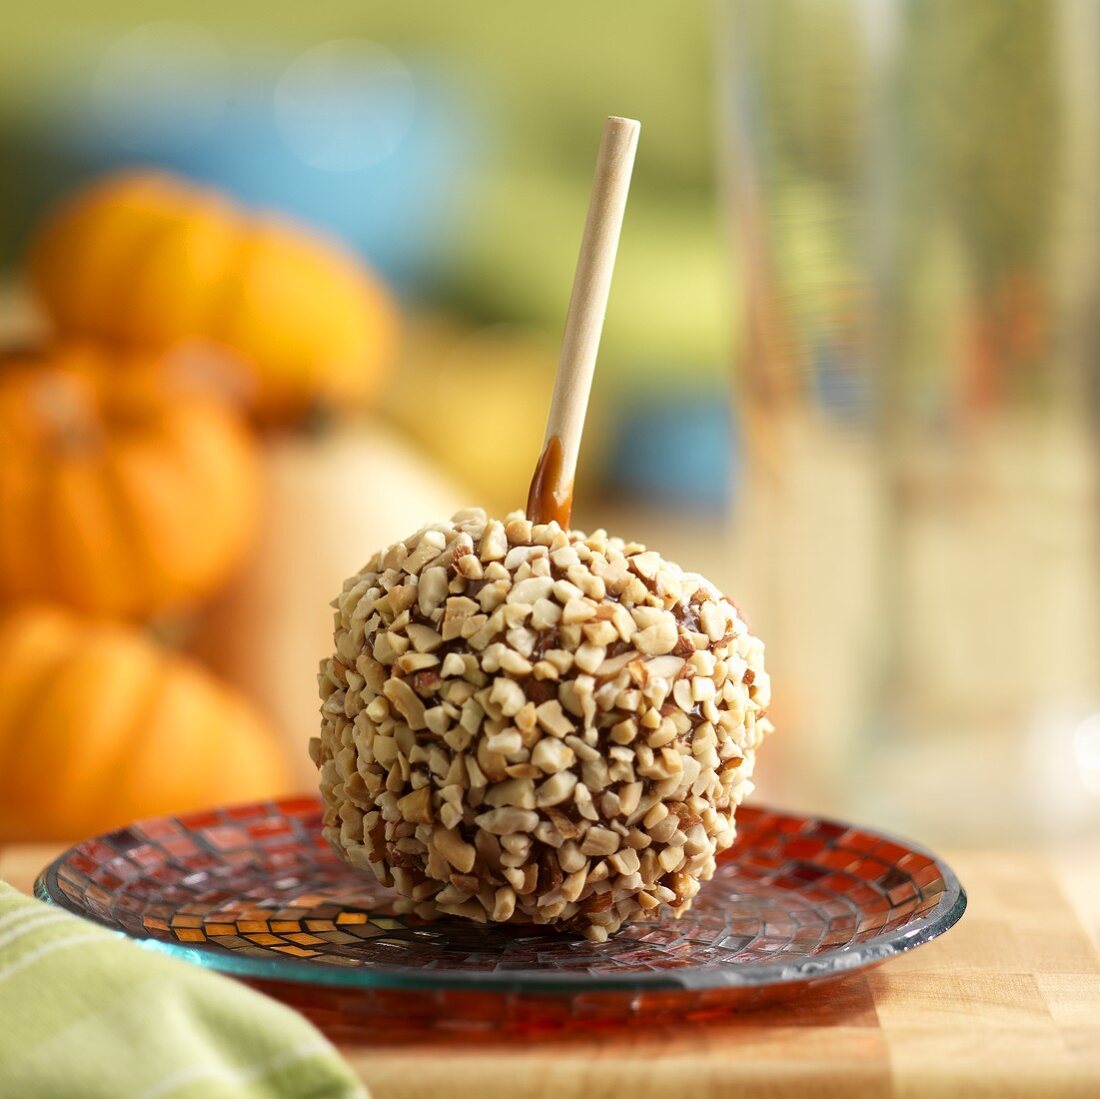 Toffee apple coated with nuts on a plate